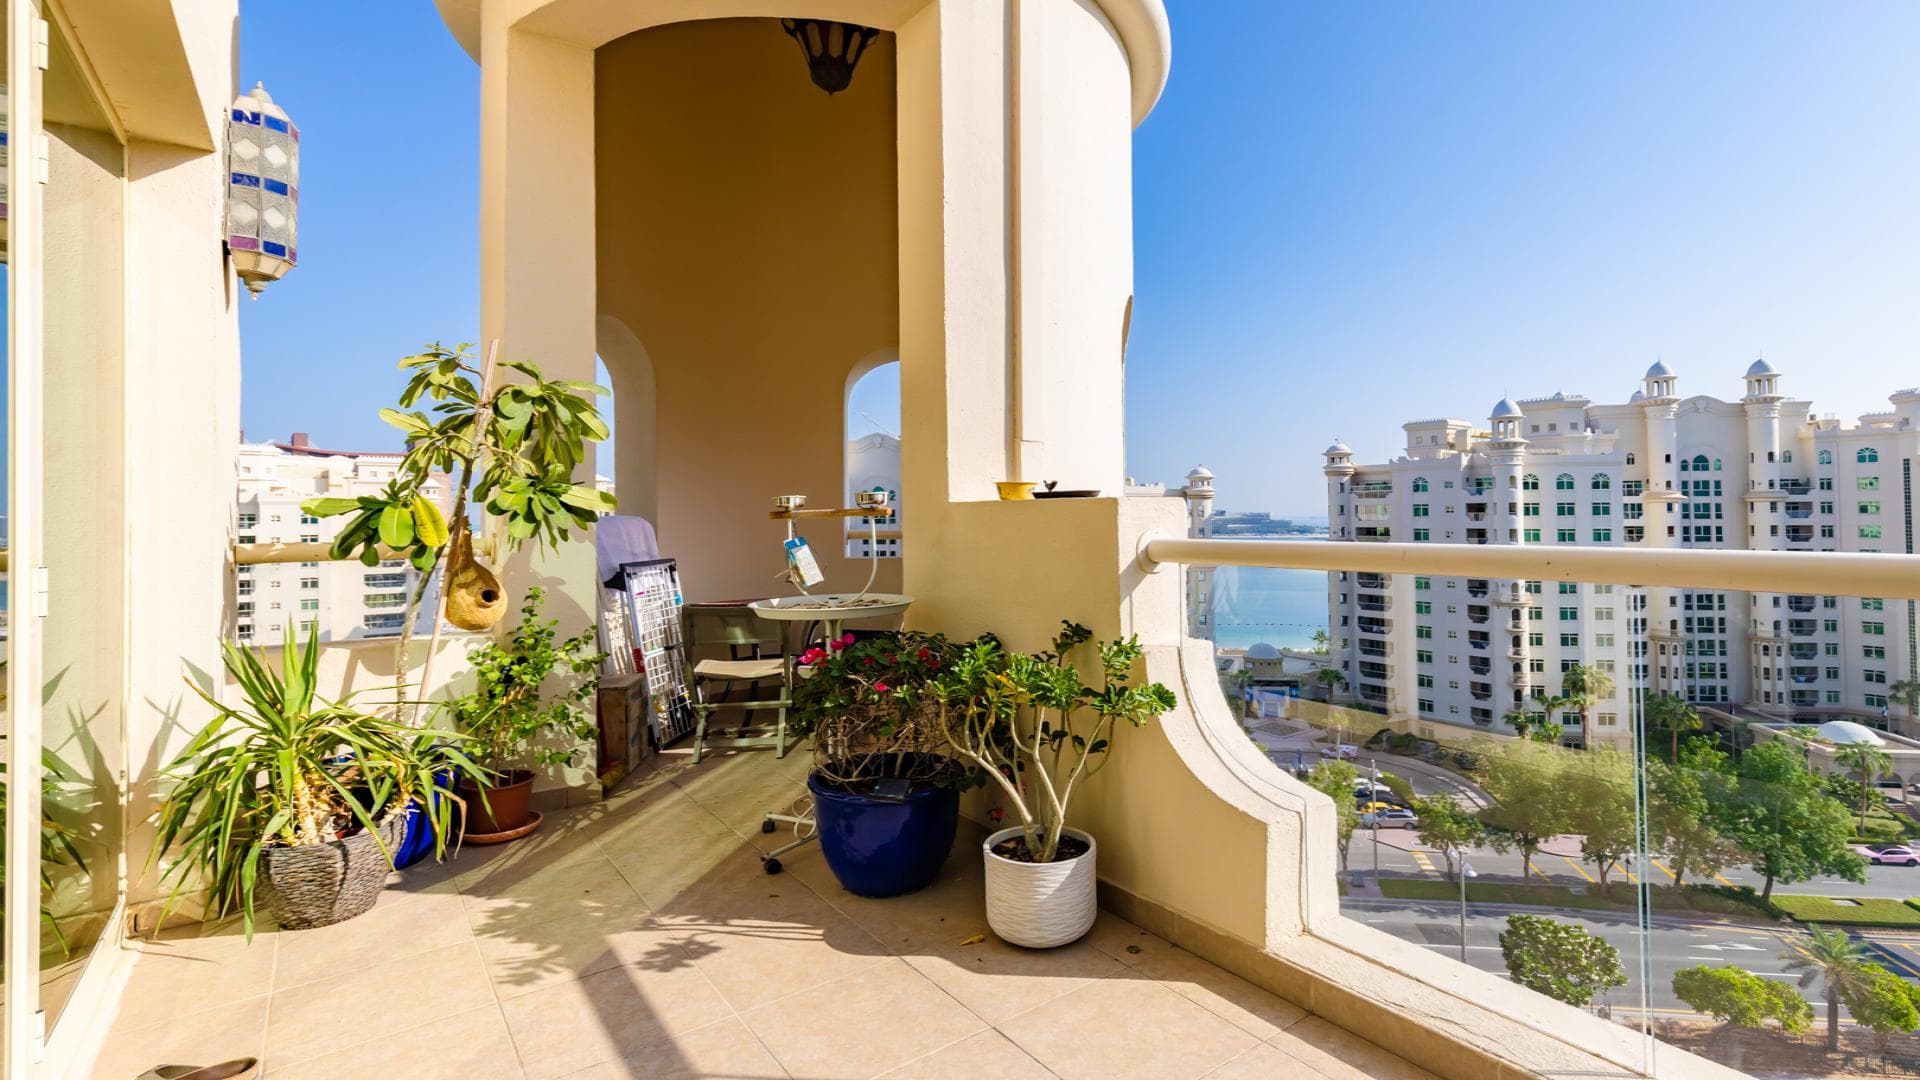 3 Bedroom Apartment For Sale Al Sheraa Tower Lp38279 320ce9bff9bc4800.jpg